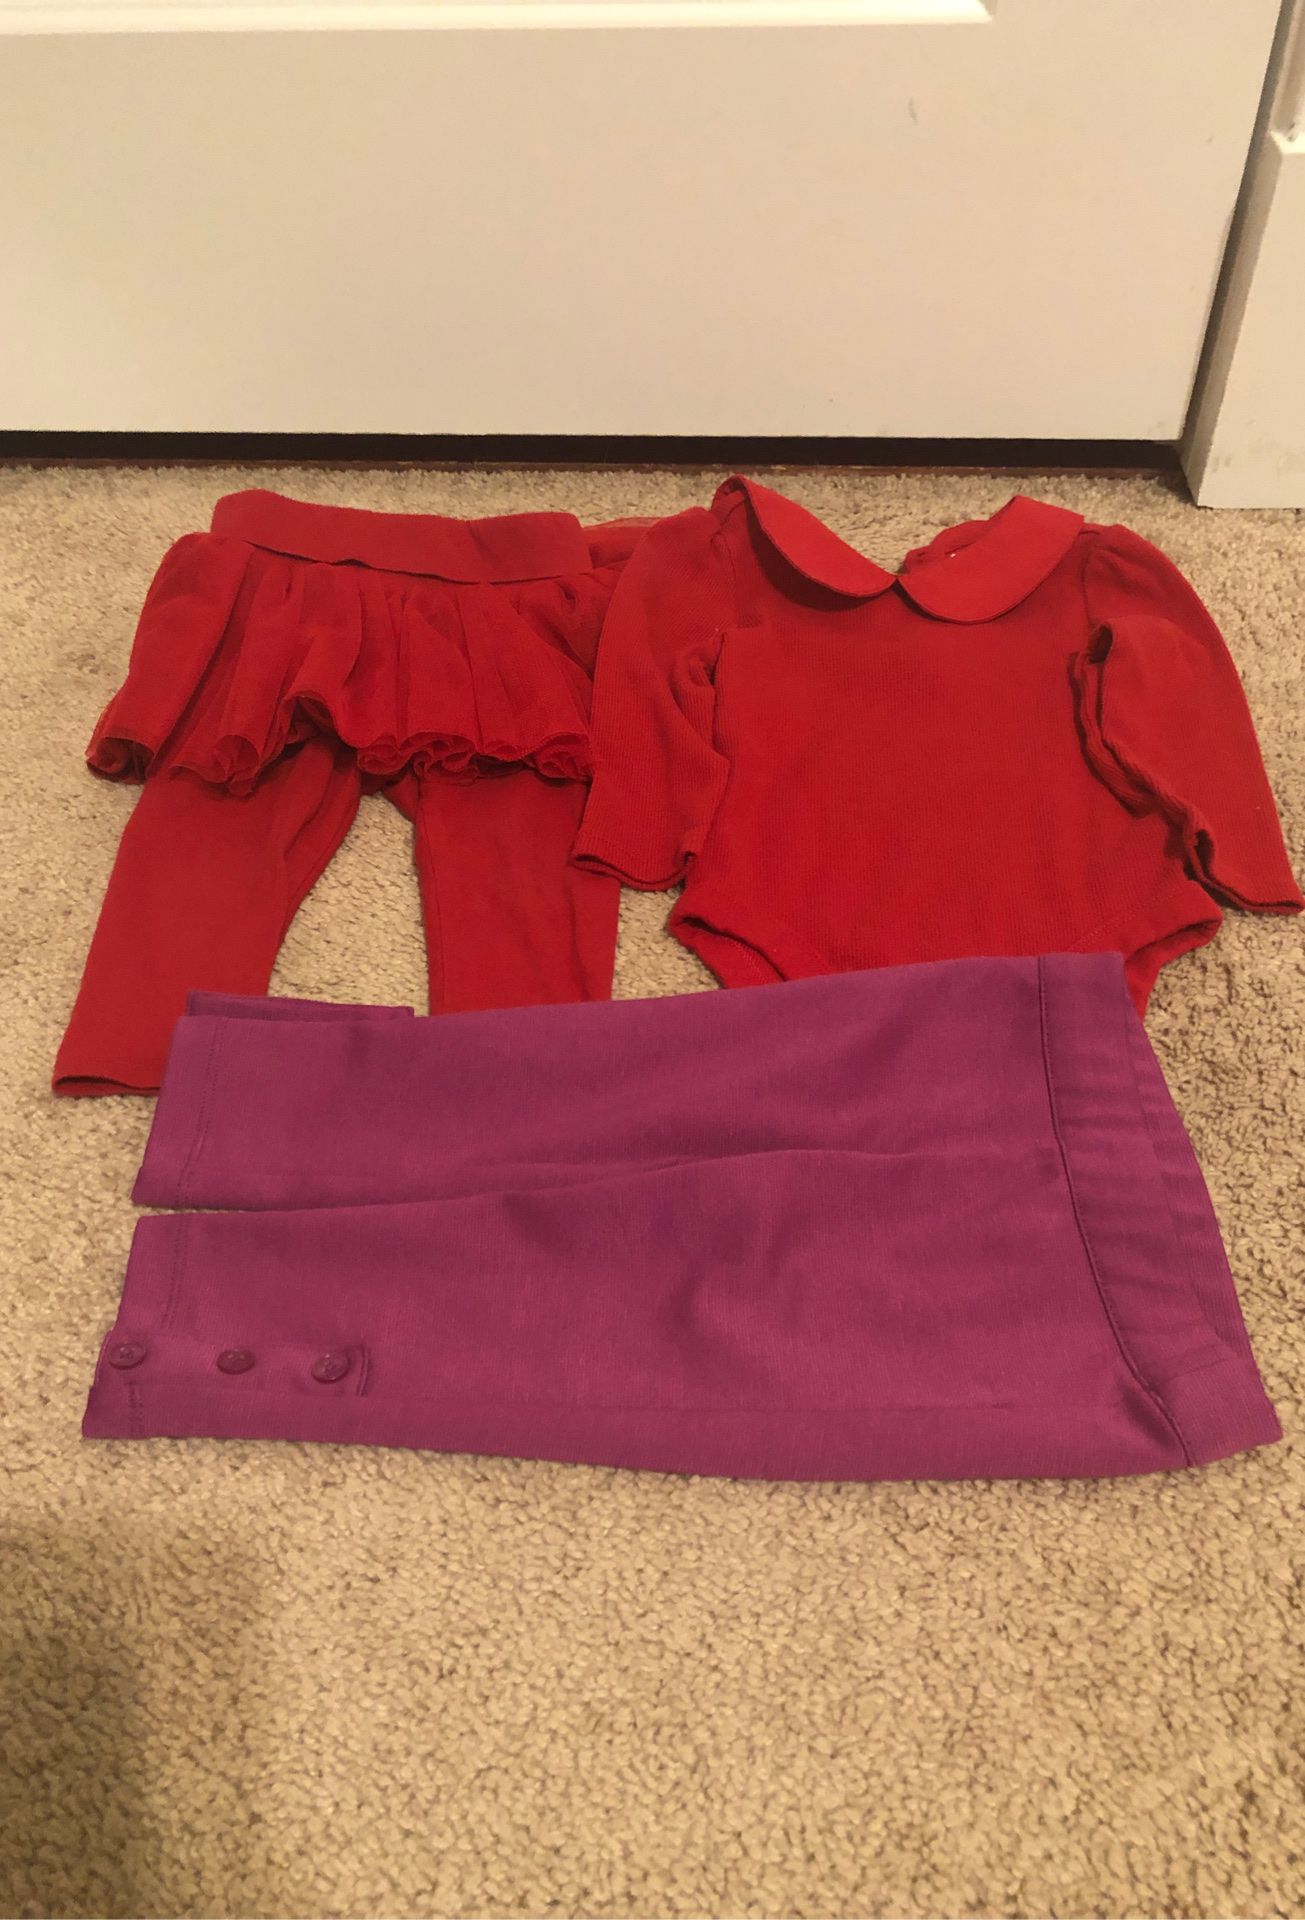 Red Baby Gap outfit 6 to 12 mos and 12 month pink pants